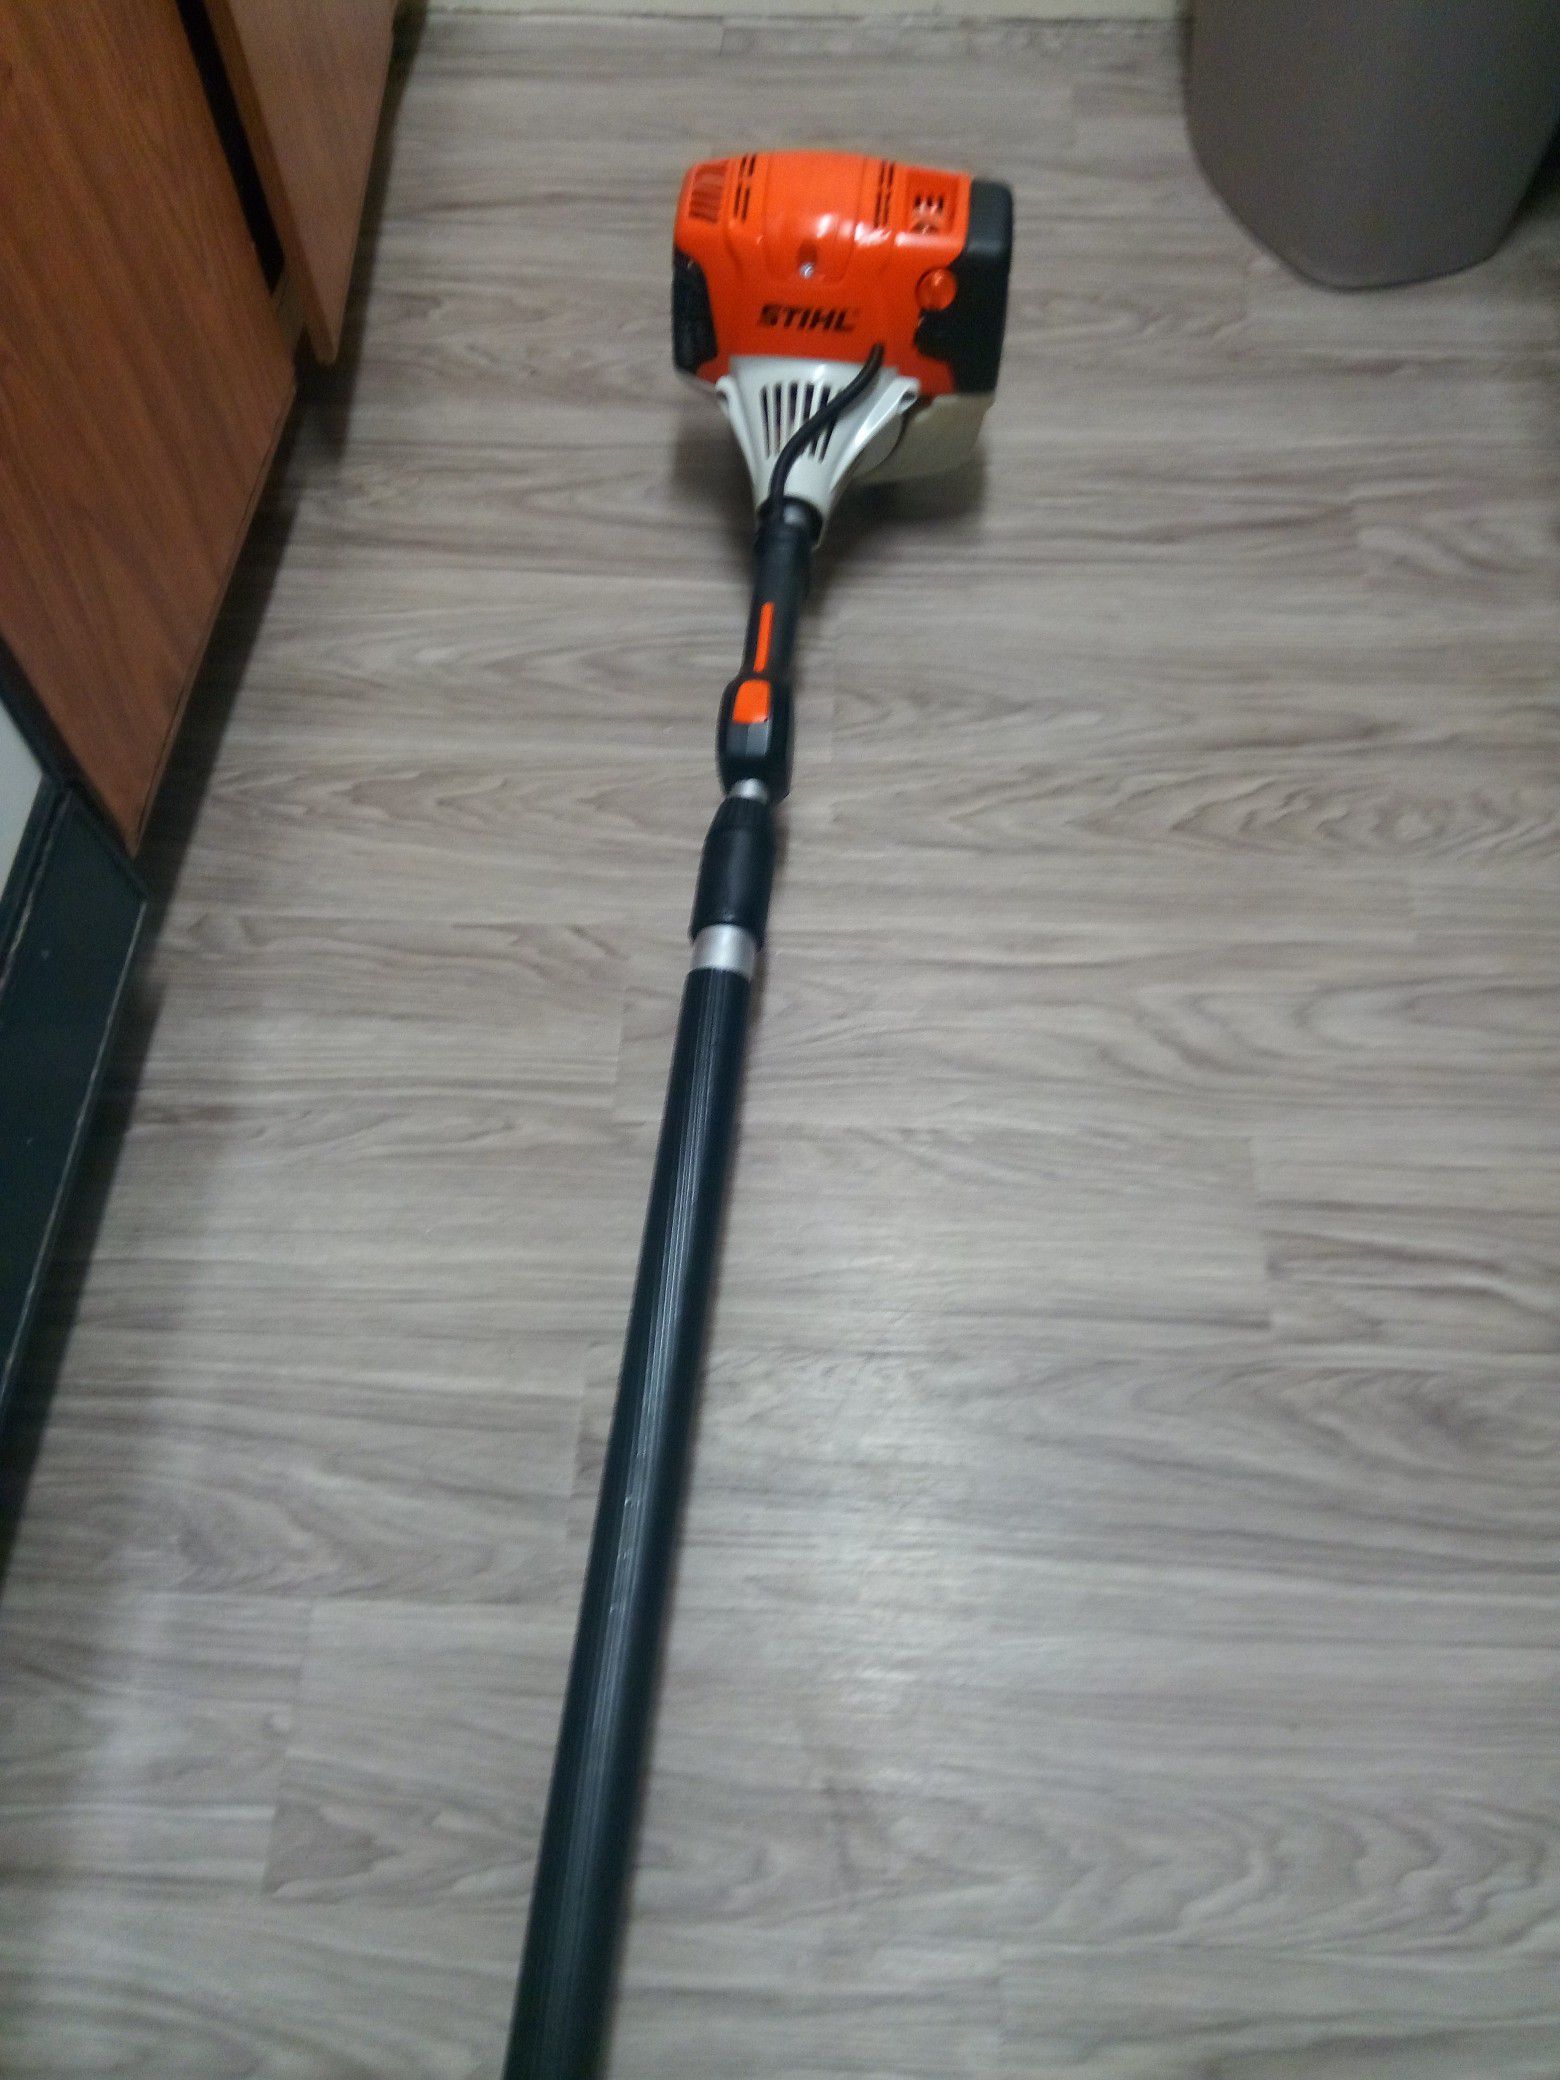 Stihl commercial pole saw